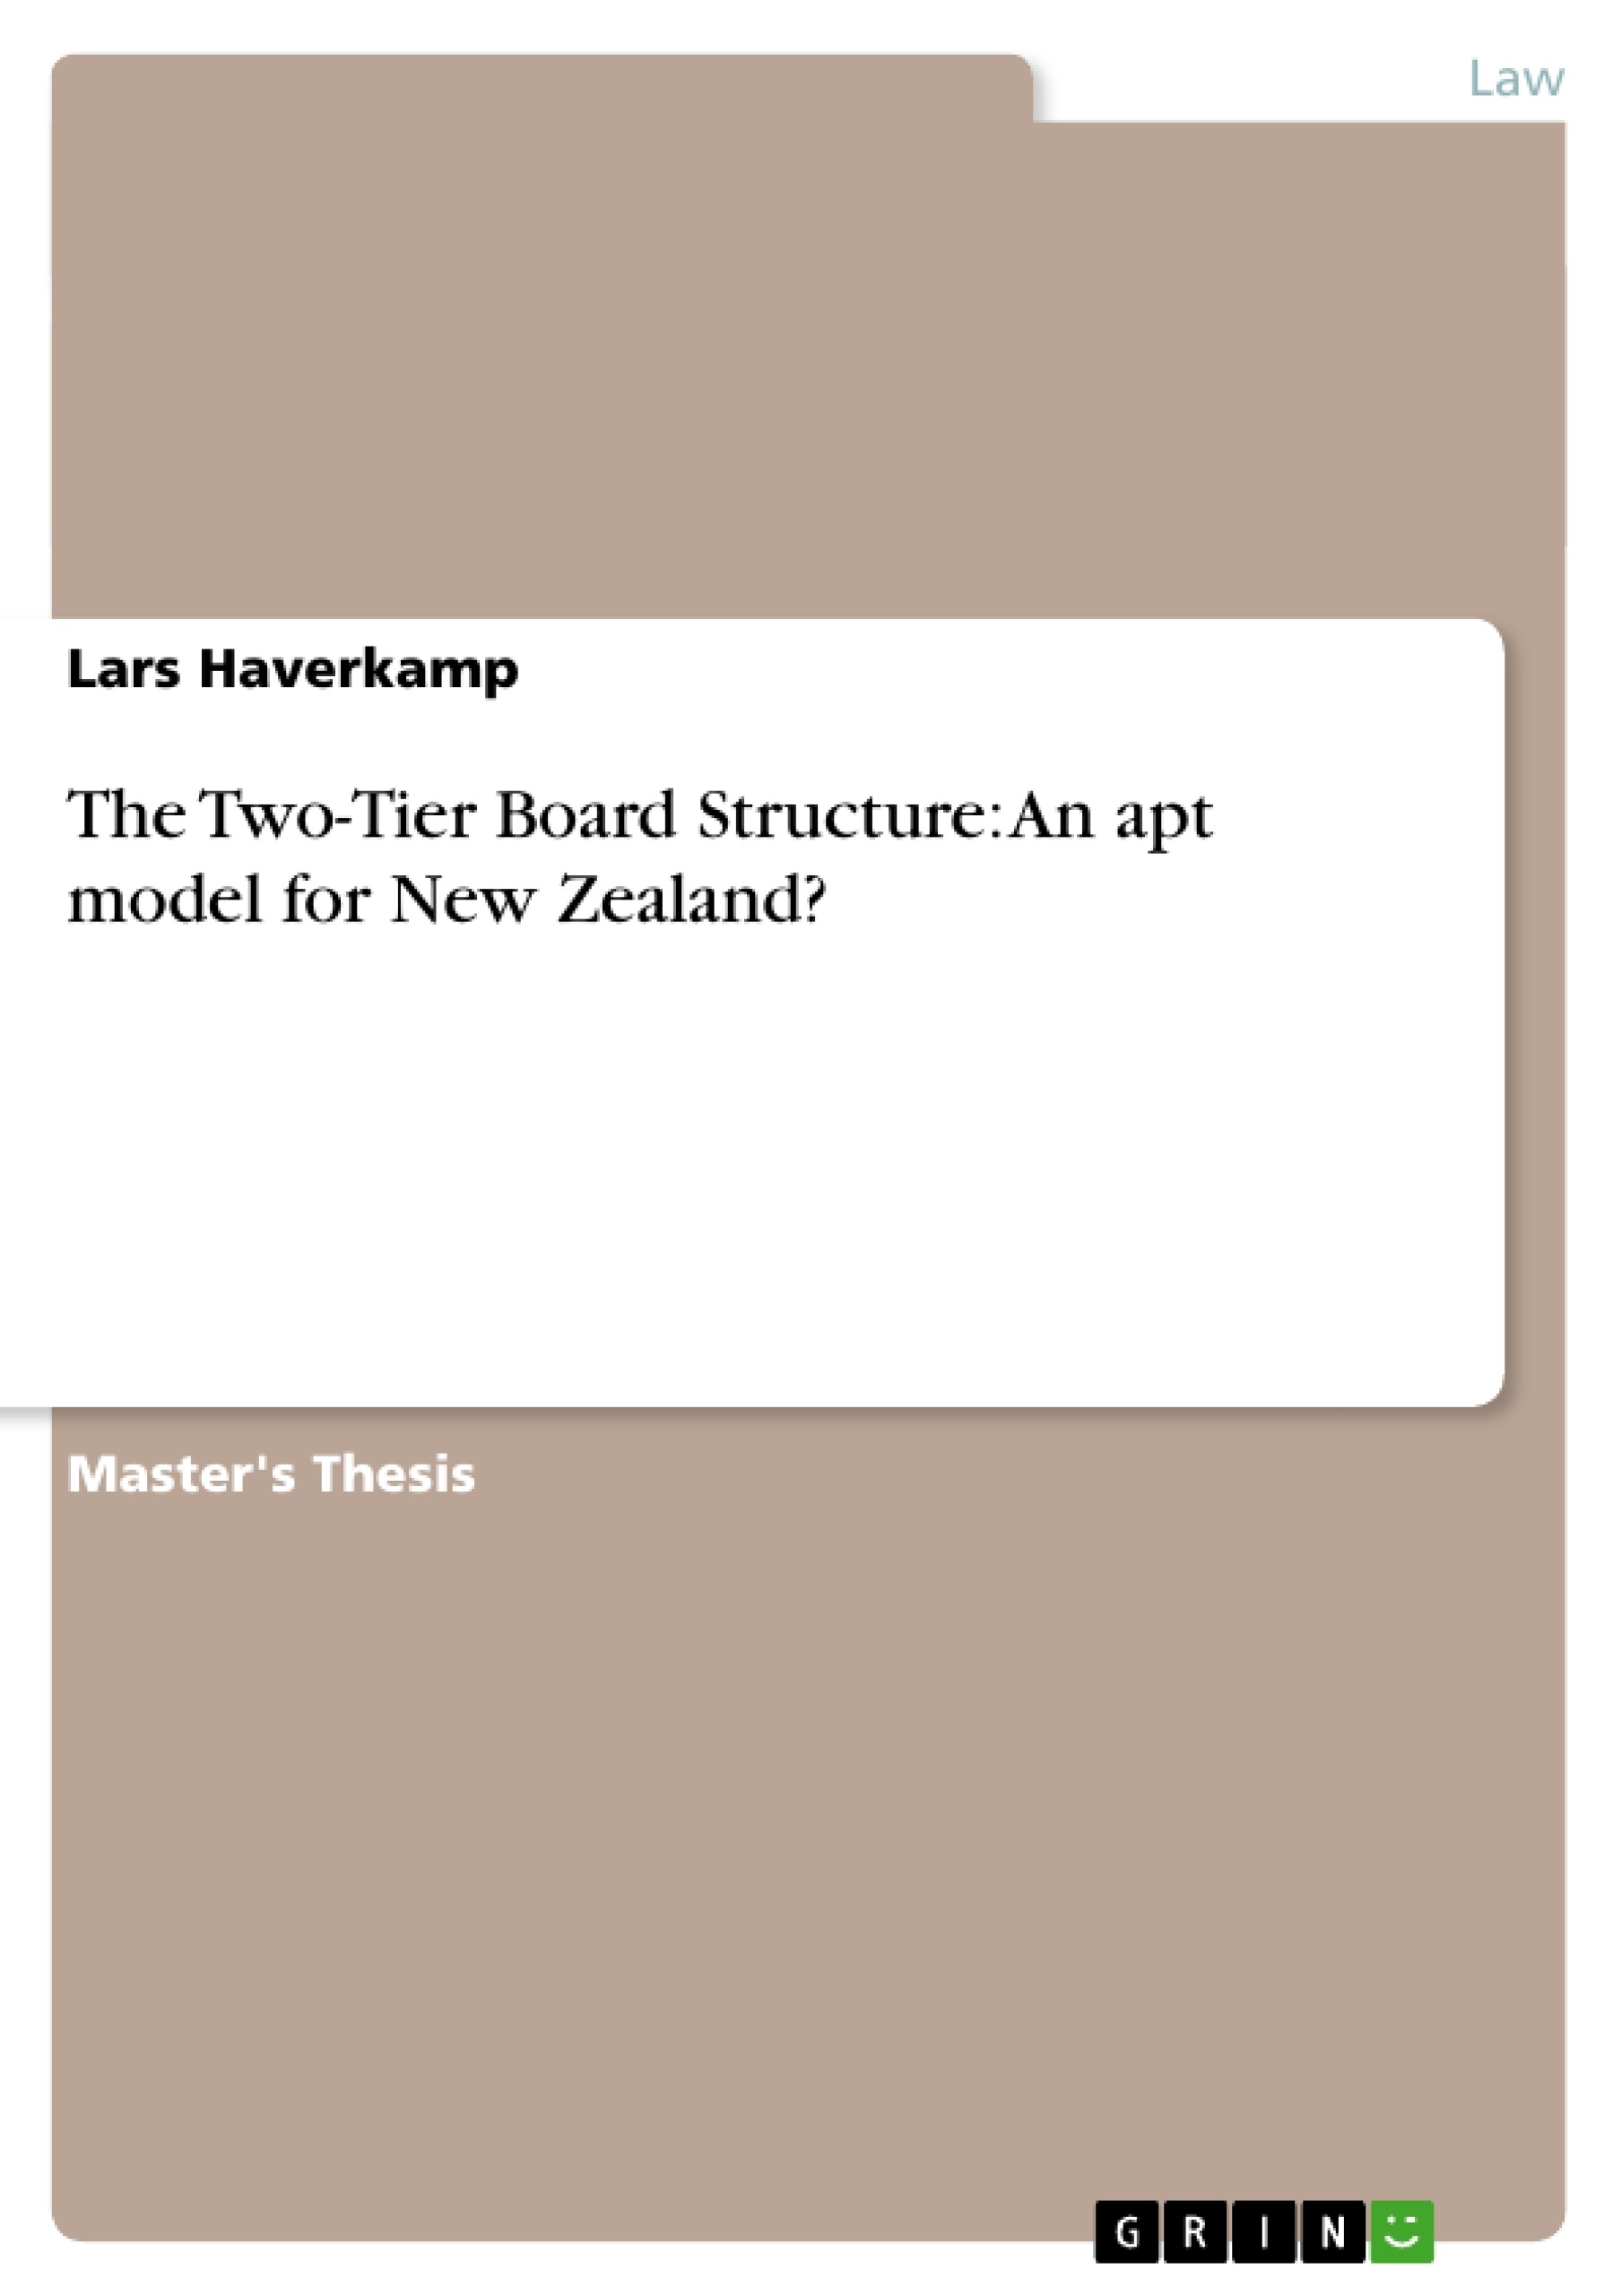 Titre: The Two-Tier Board Structure: An apt model for New Zealand?